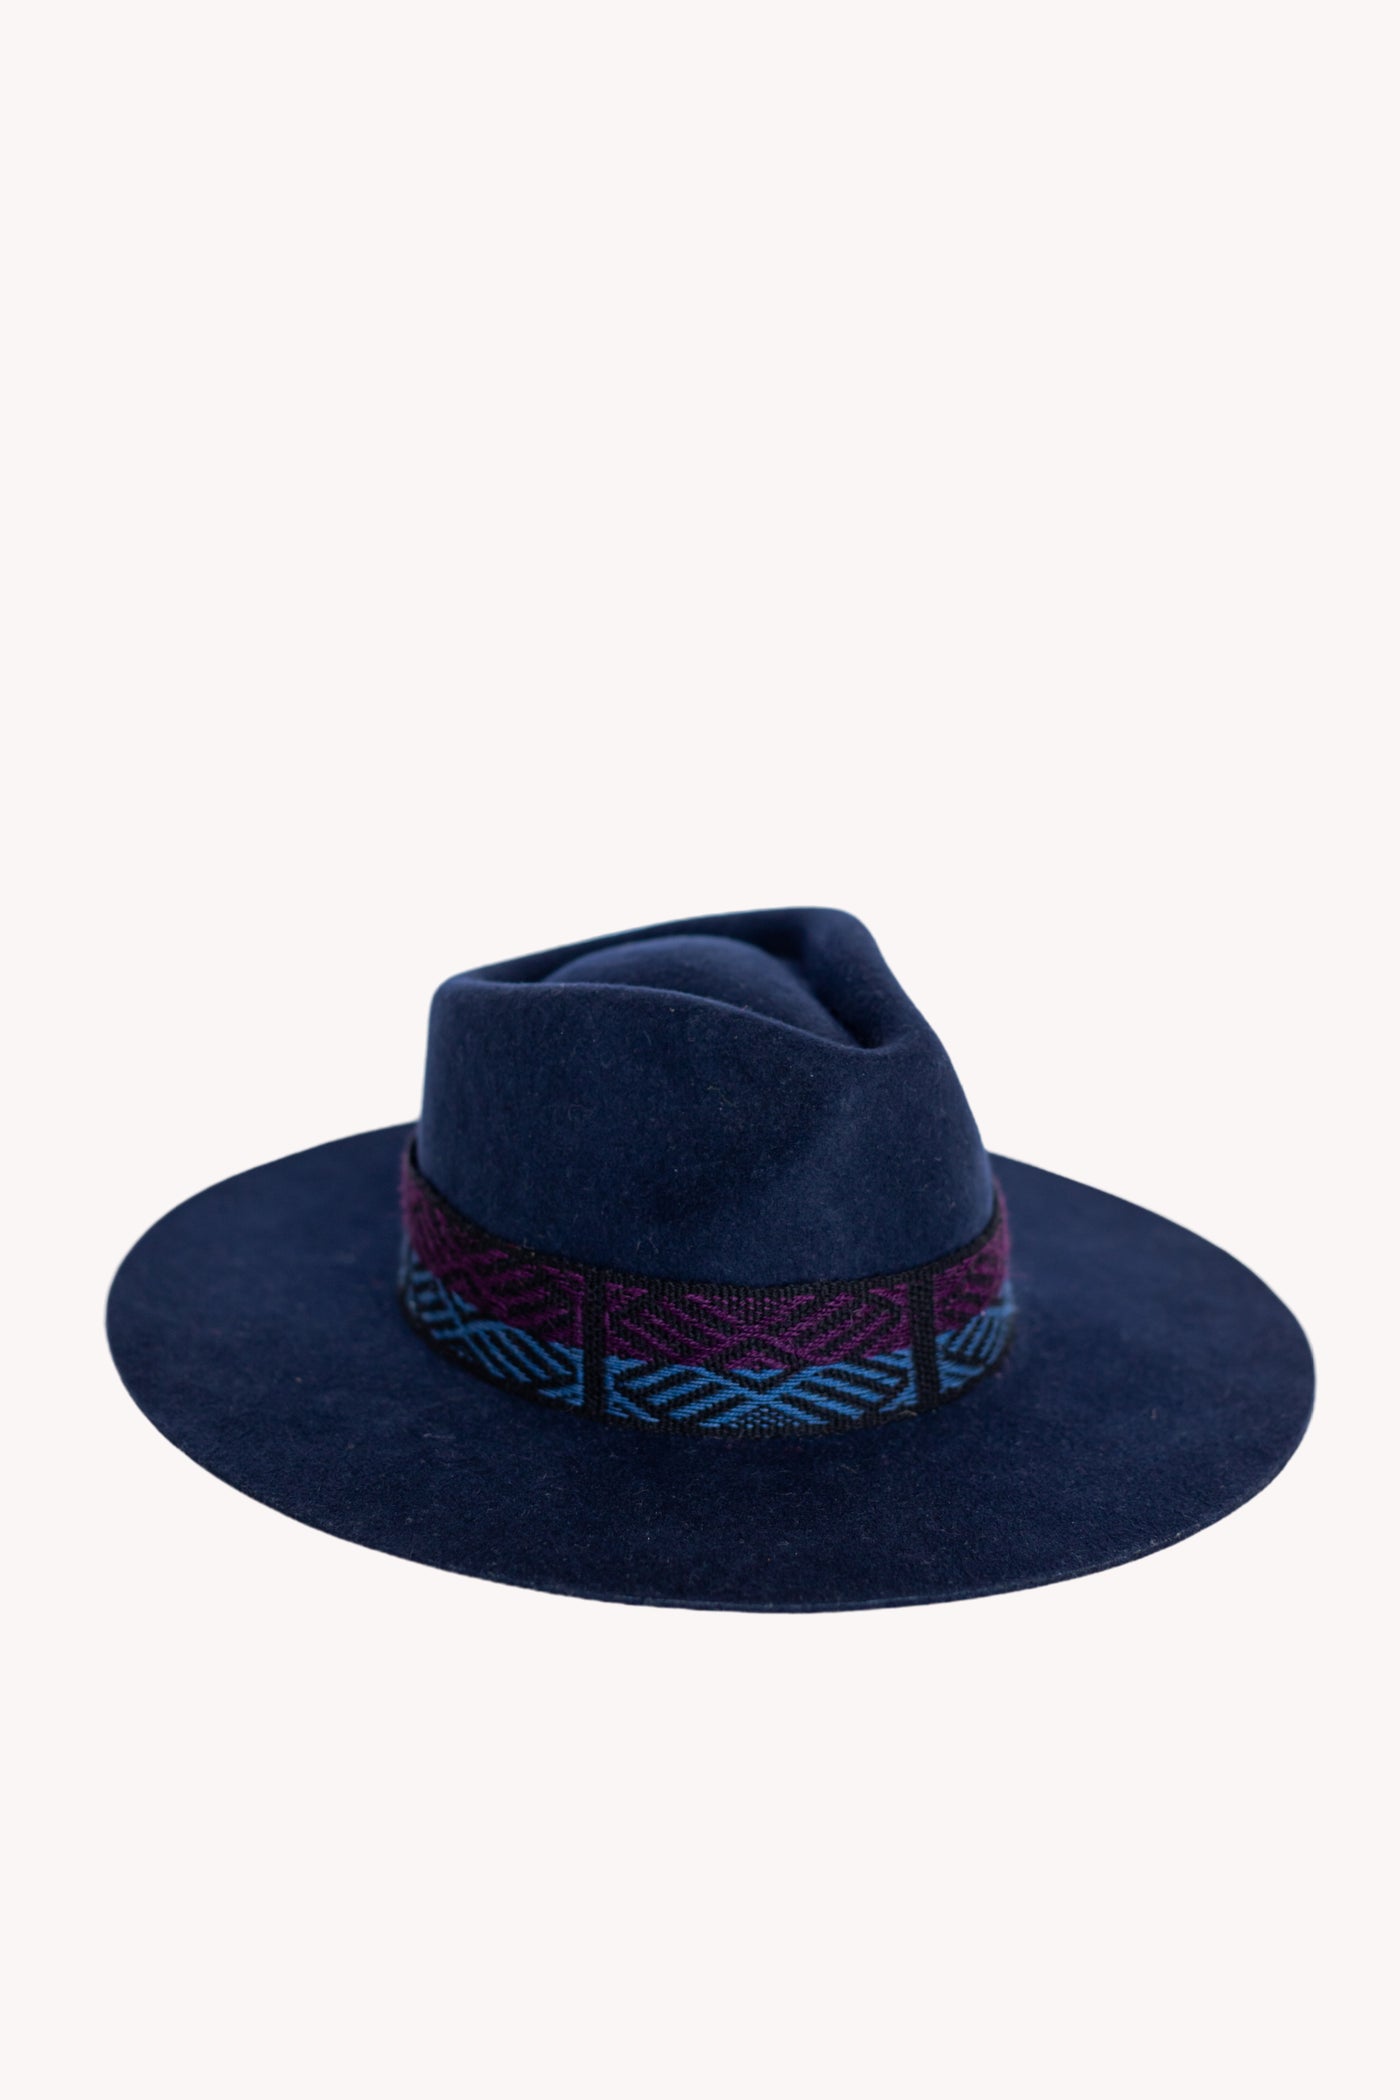 Navy Blue Cowboy Hat with Wisdom Intention Band  Removable Intention Hat Textile Band